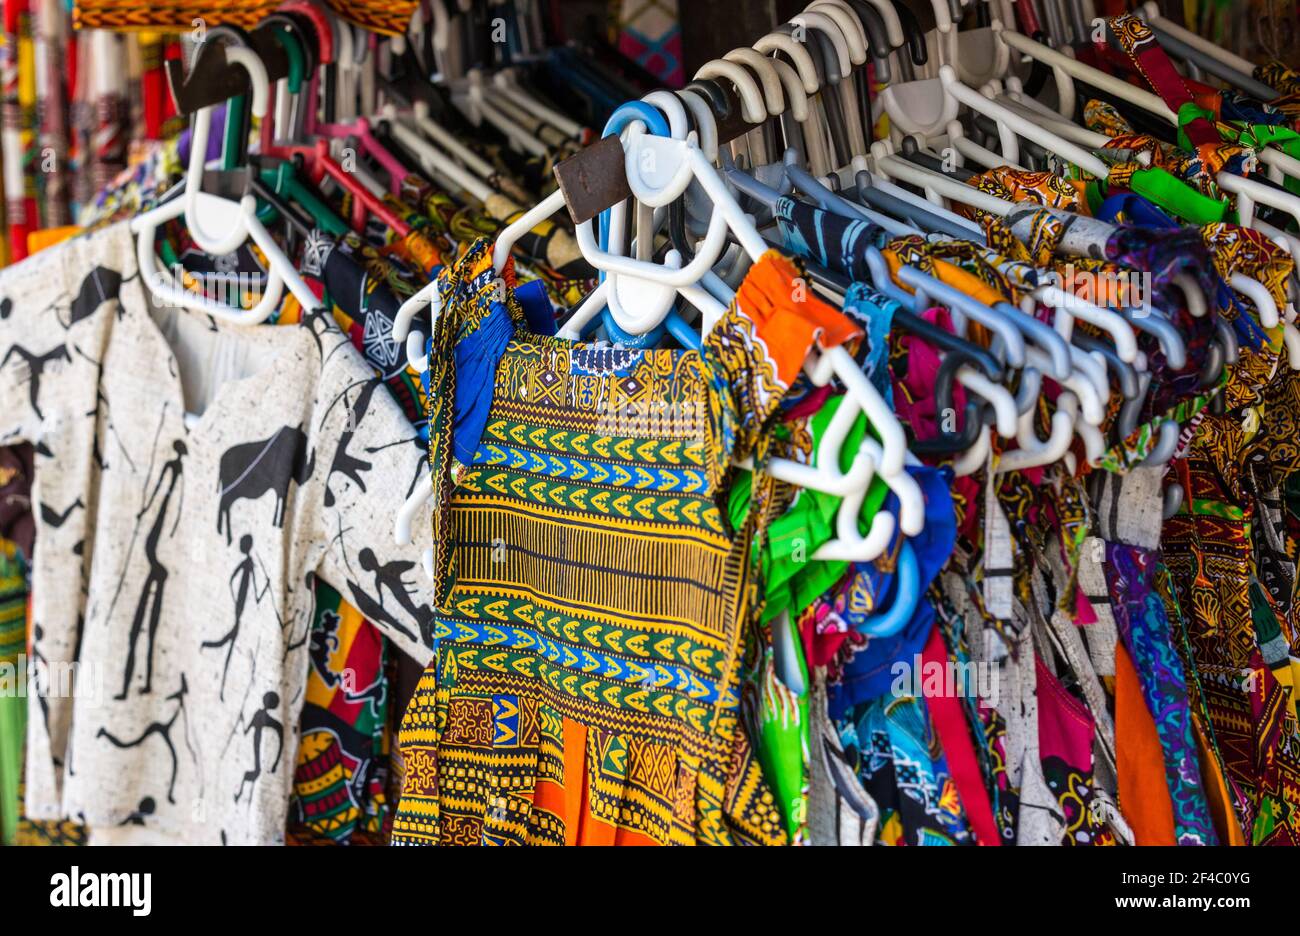 childrens clothing, kids clothes made in traditional African fabric or material hanging up for sale in South Africa, closeup Stock Photo